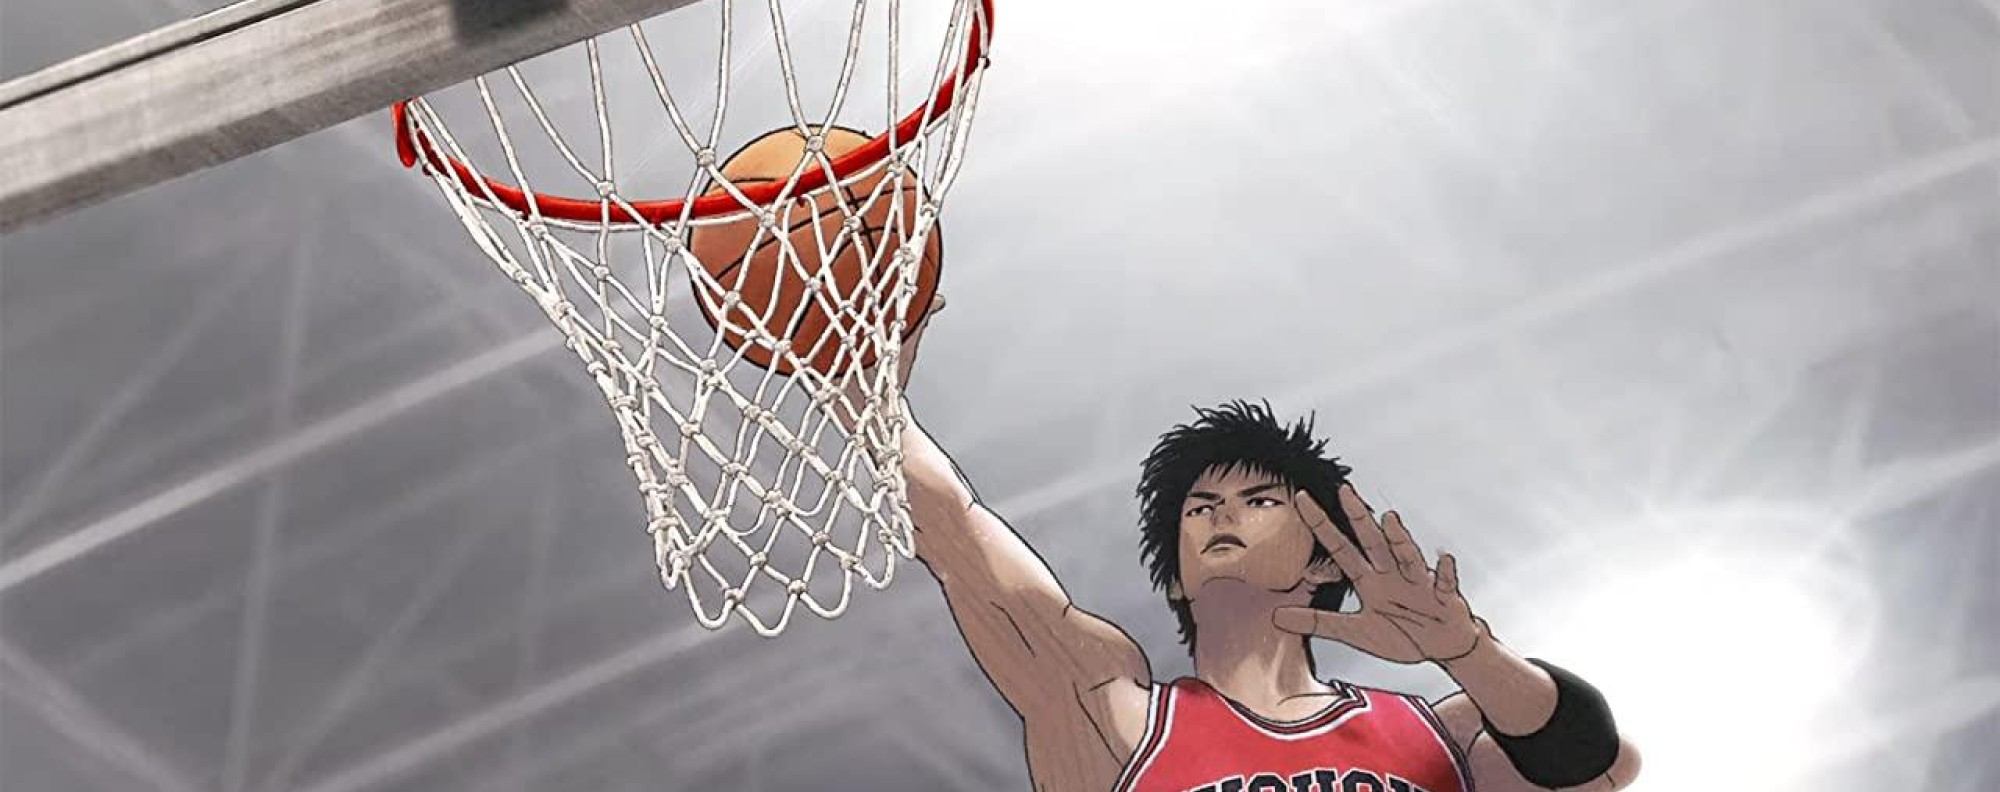 The First Slam Dunk movie review: 5-star animated masterpiece breathes new  life into iconic basketball manga series by Takehiko Inoue | South China  Morning Post